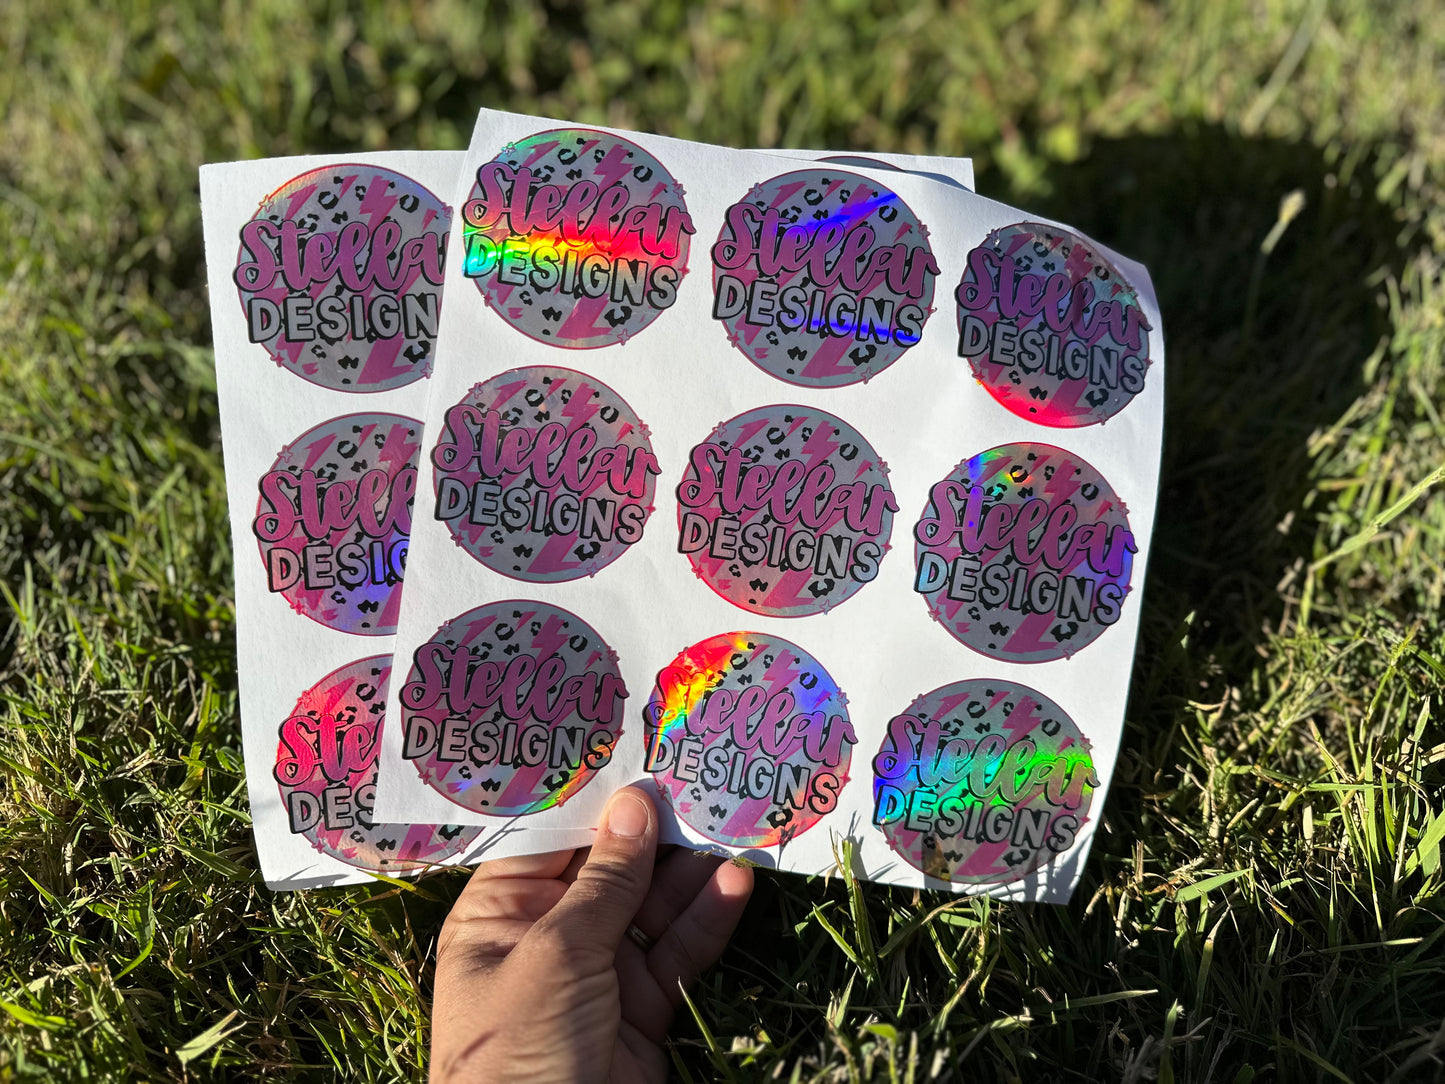 Holographic business stickers